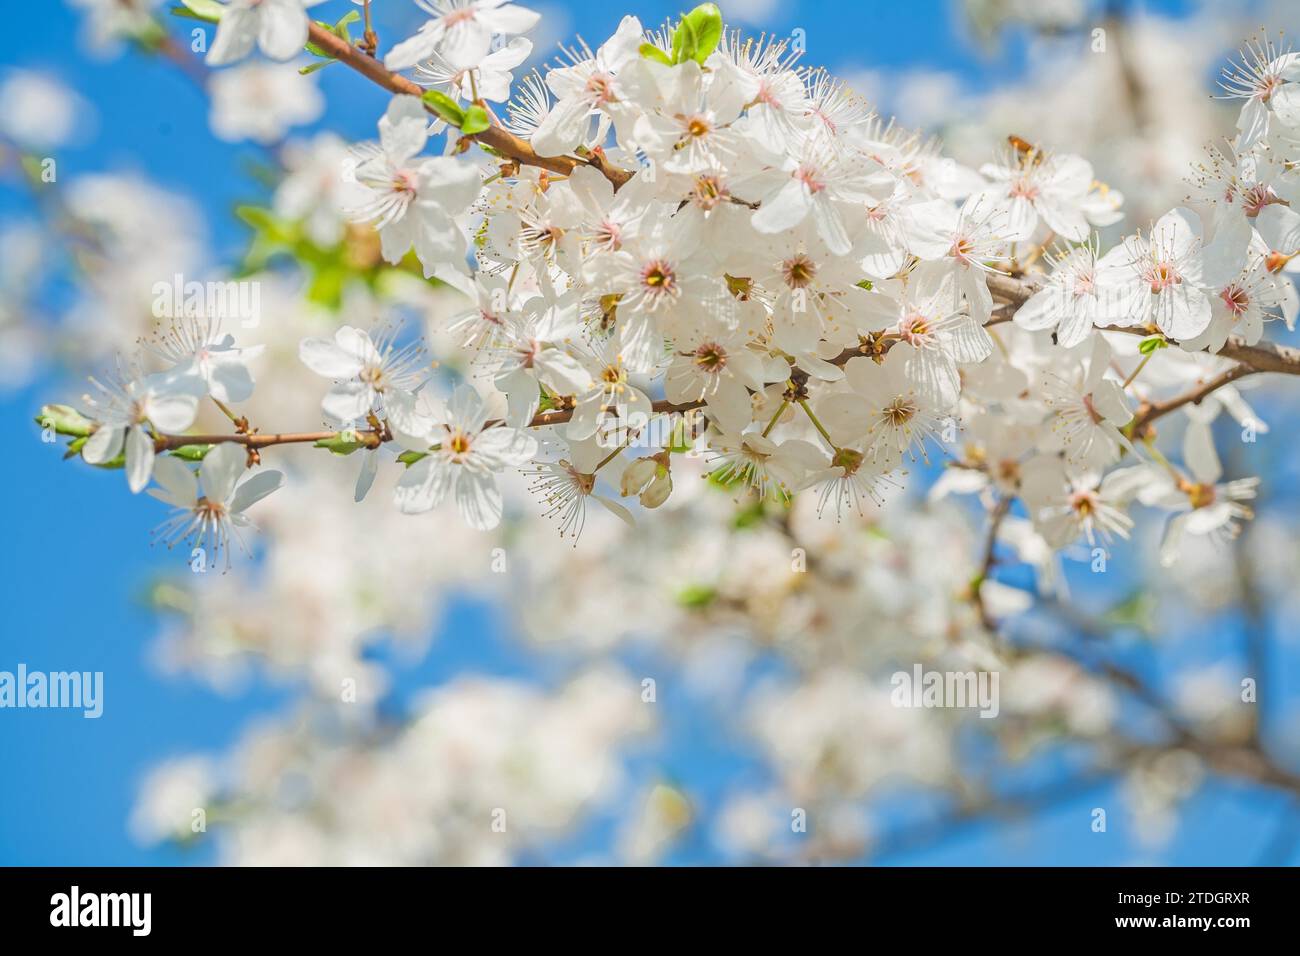 Big branch of blossoming cherry tree on sky instagram style Stock Photo